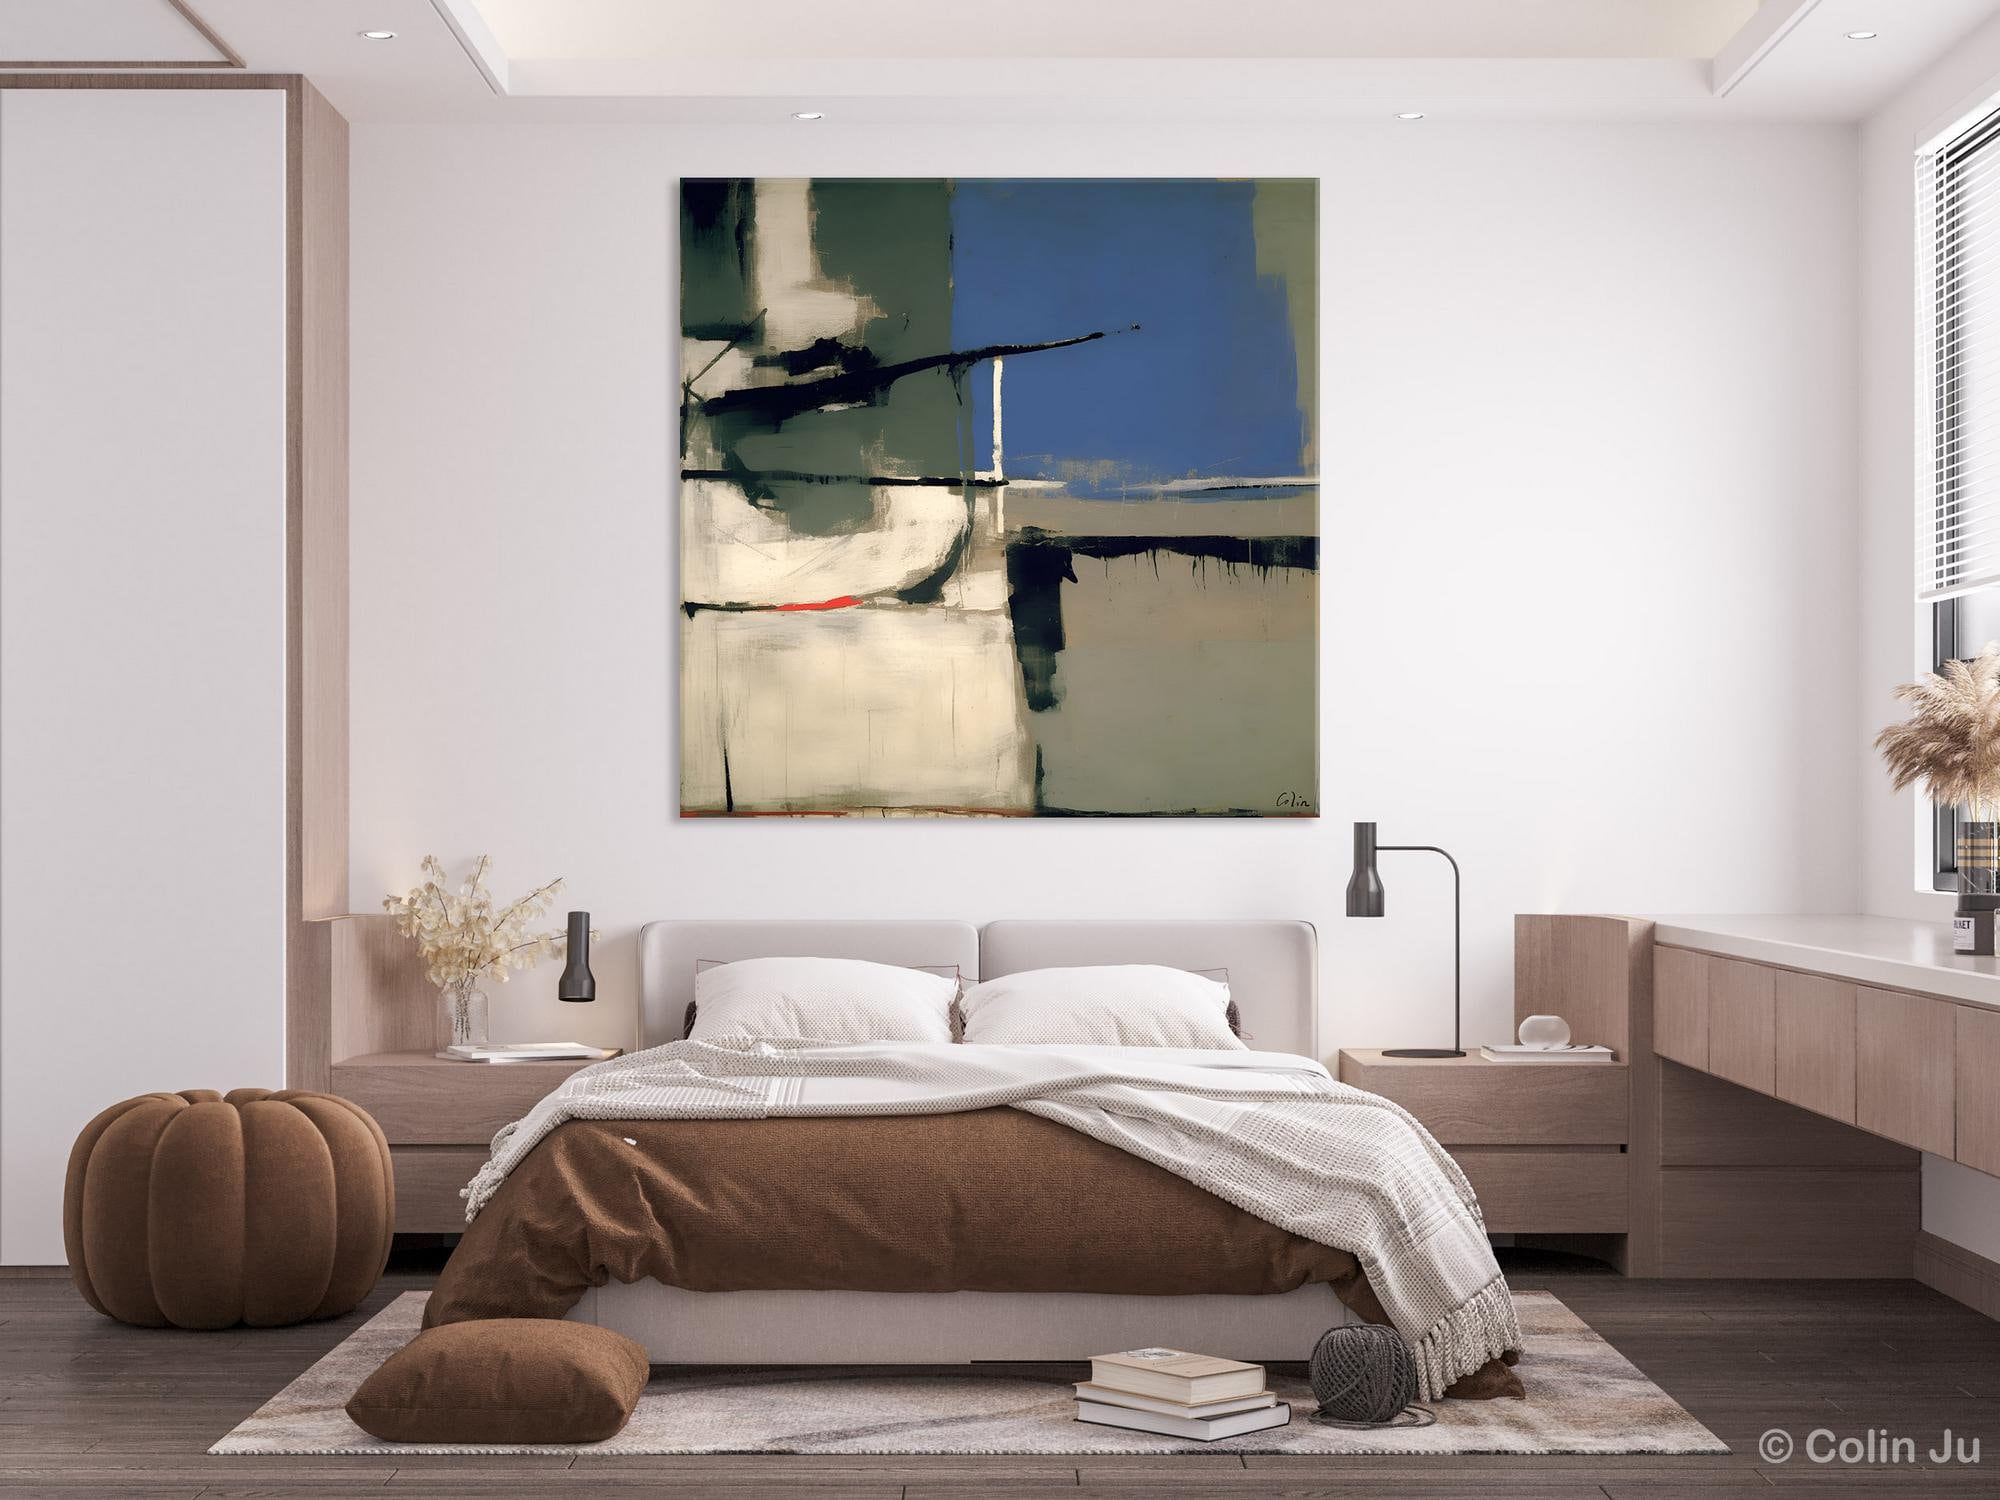 Original Abstract Art for Living Room, Contemporary Wall Art on Canvas, Extra Large Abstract Art for Bedroom, Modern Acrylic Art for Sale-Art Painting Canvas